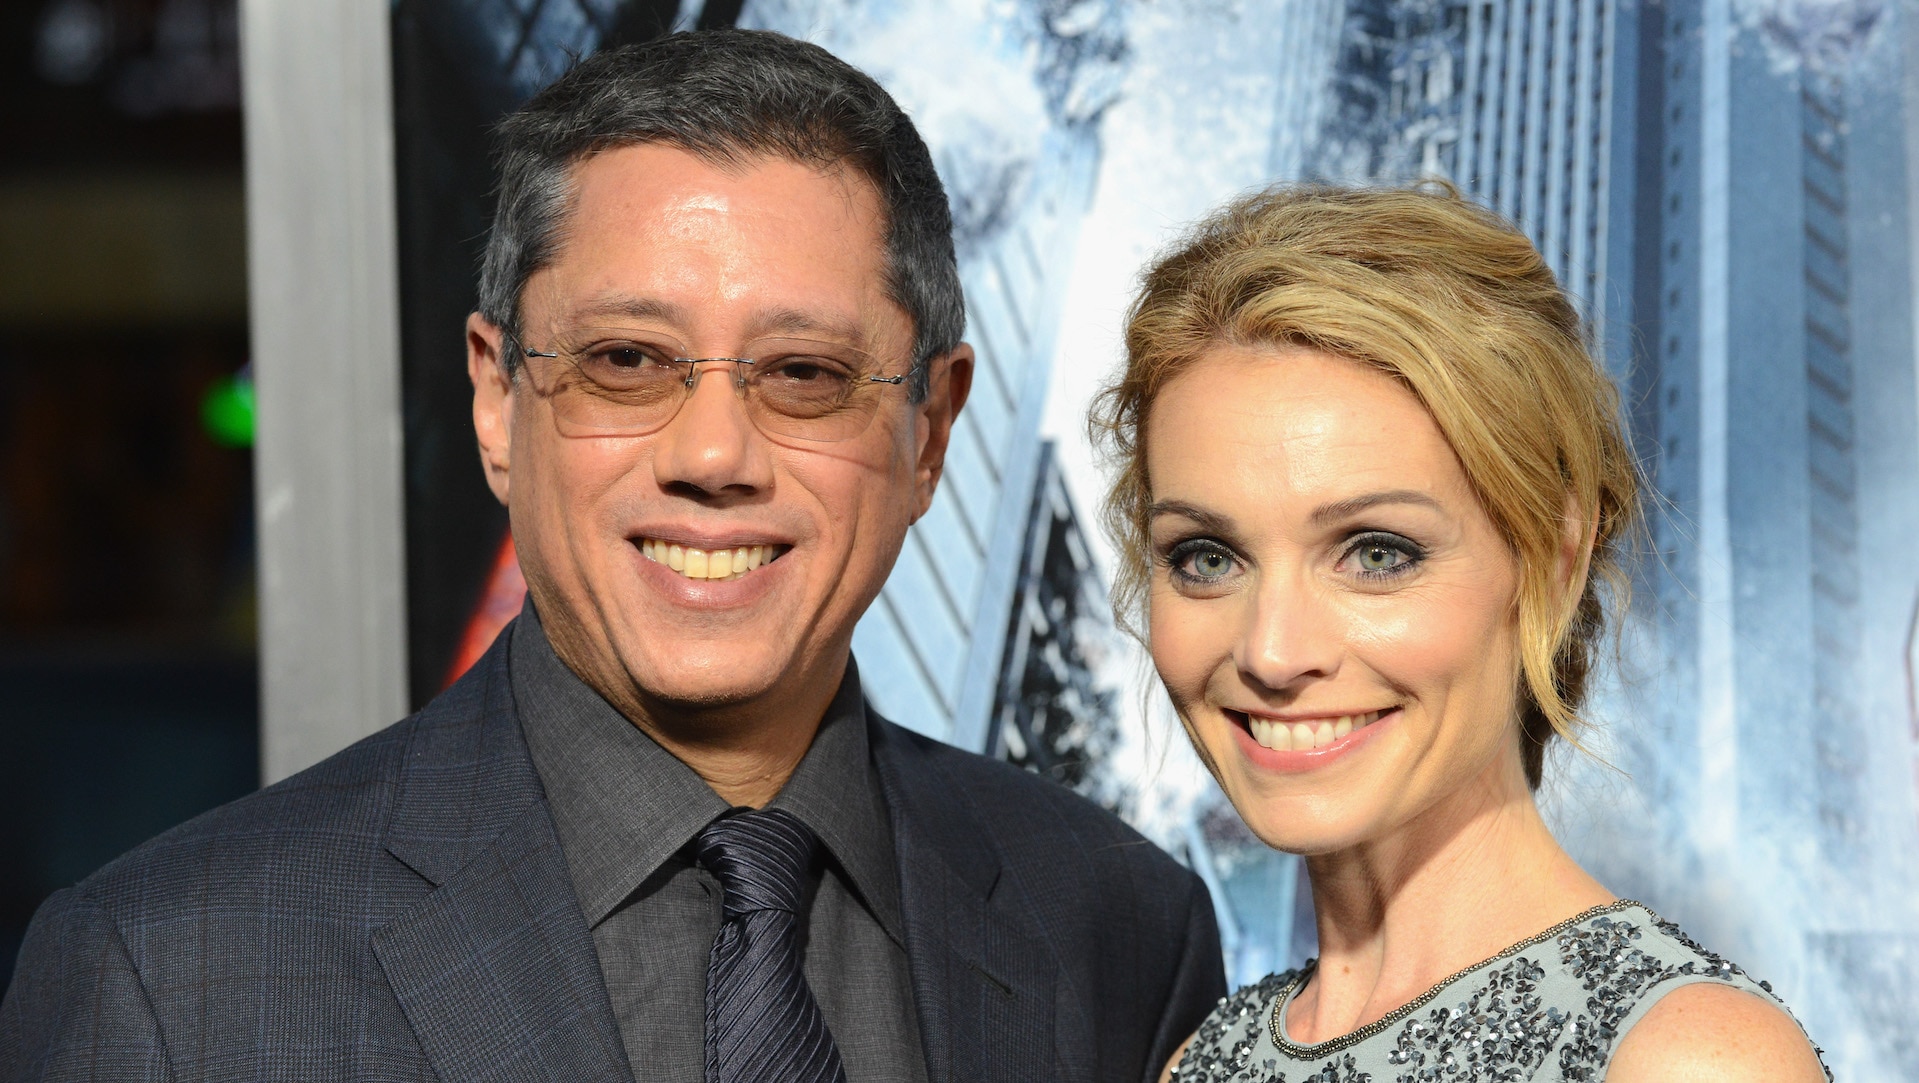 (L-R) Director Dean Devlin and wife/actress Lisa Brenner